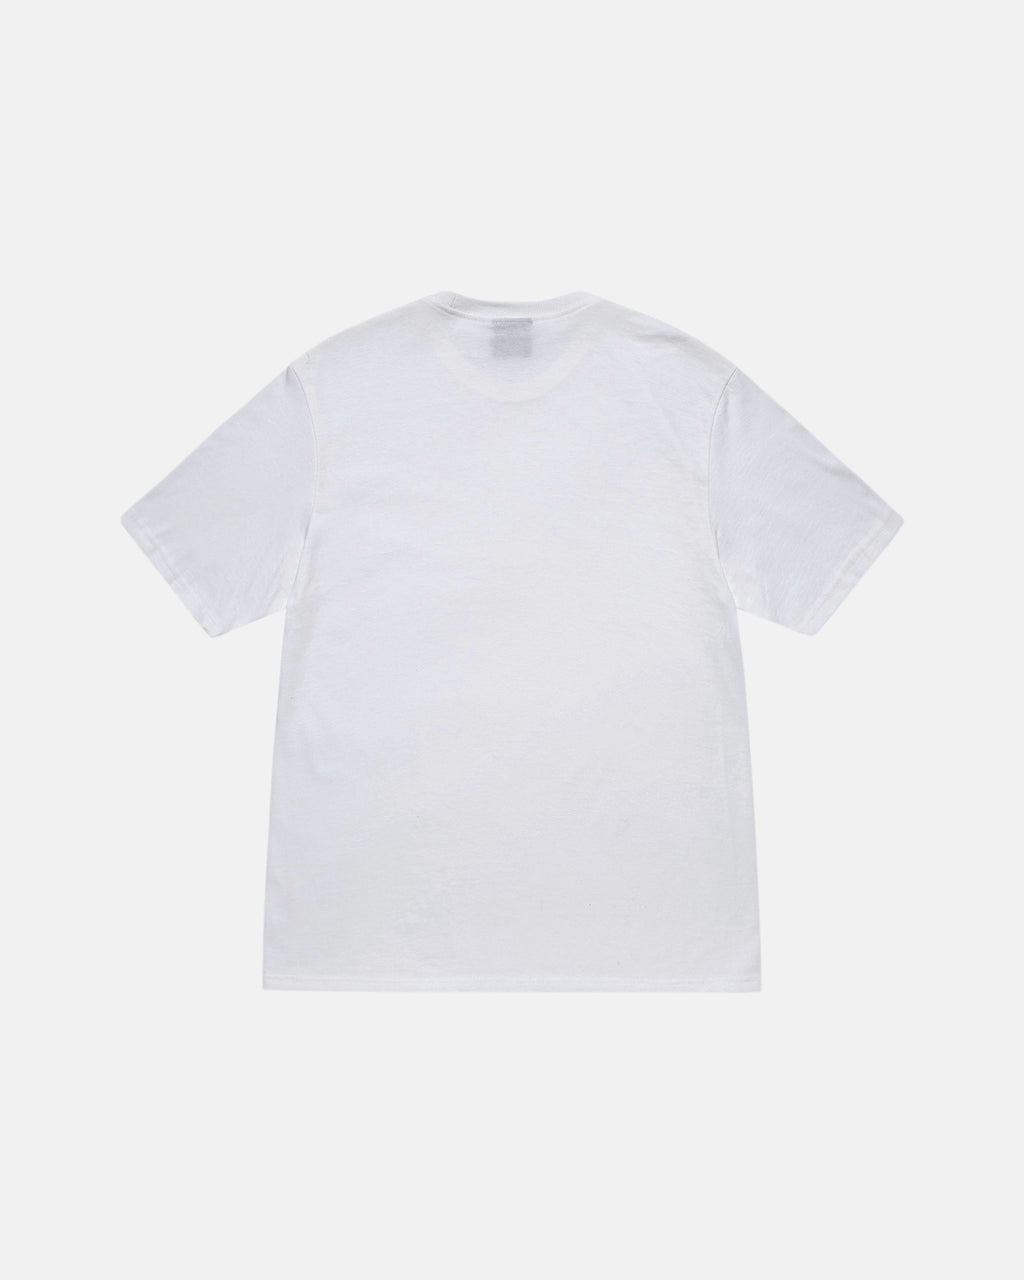 Stussy Racecar Tee Store Outlet Sale - White Tee